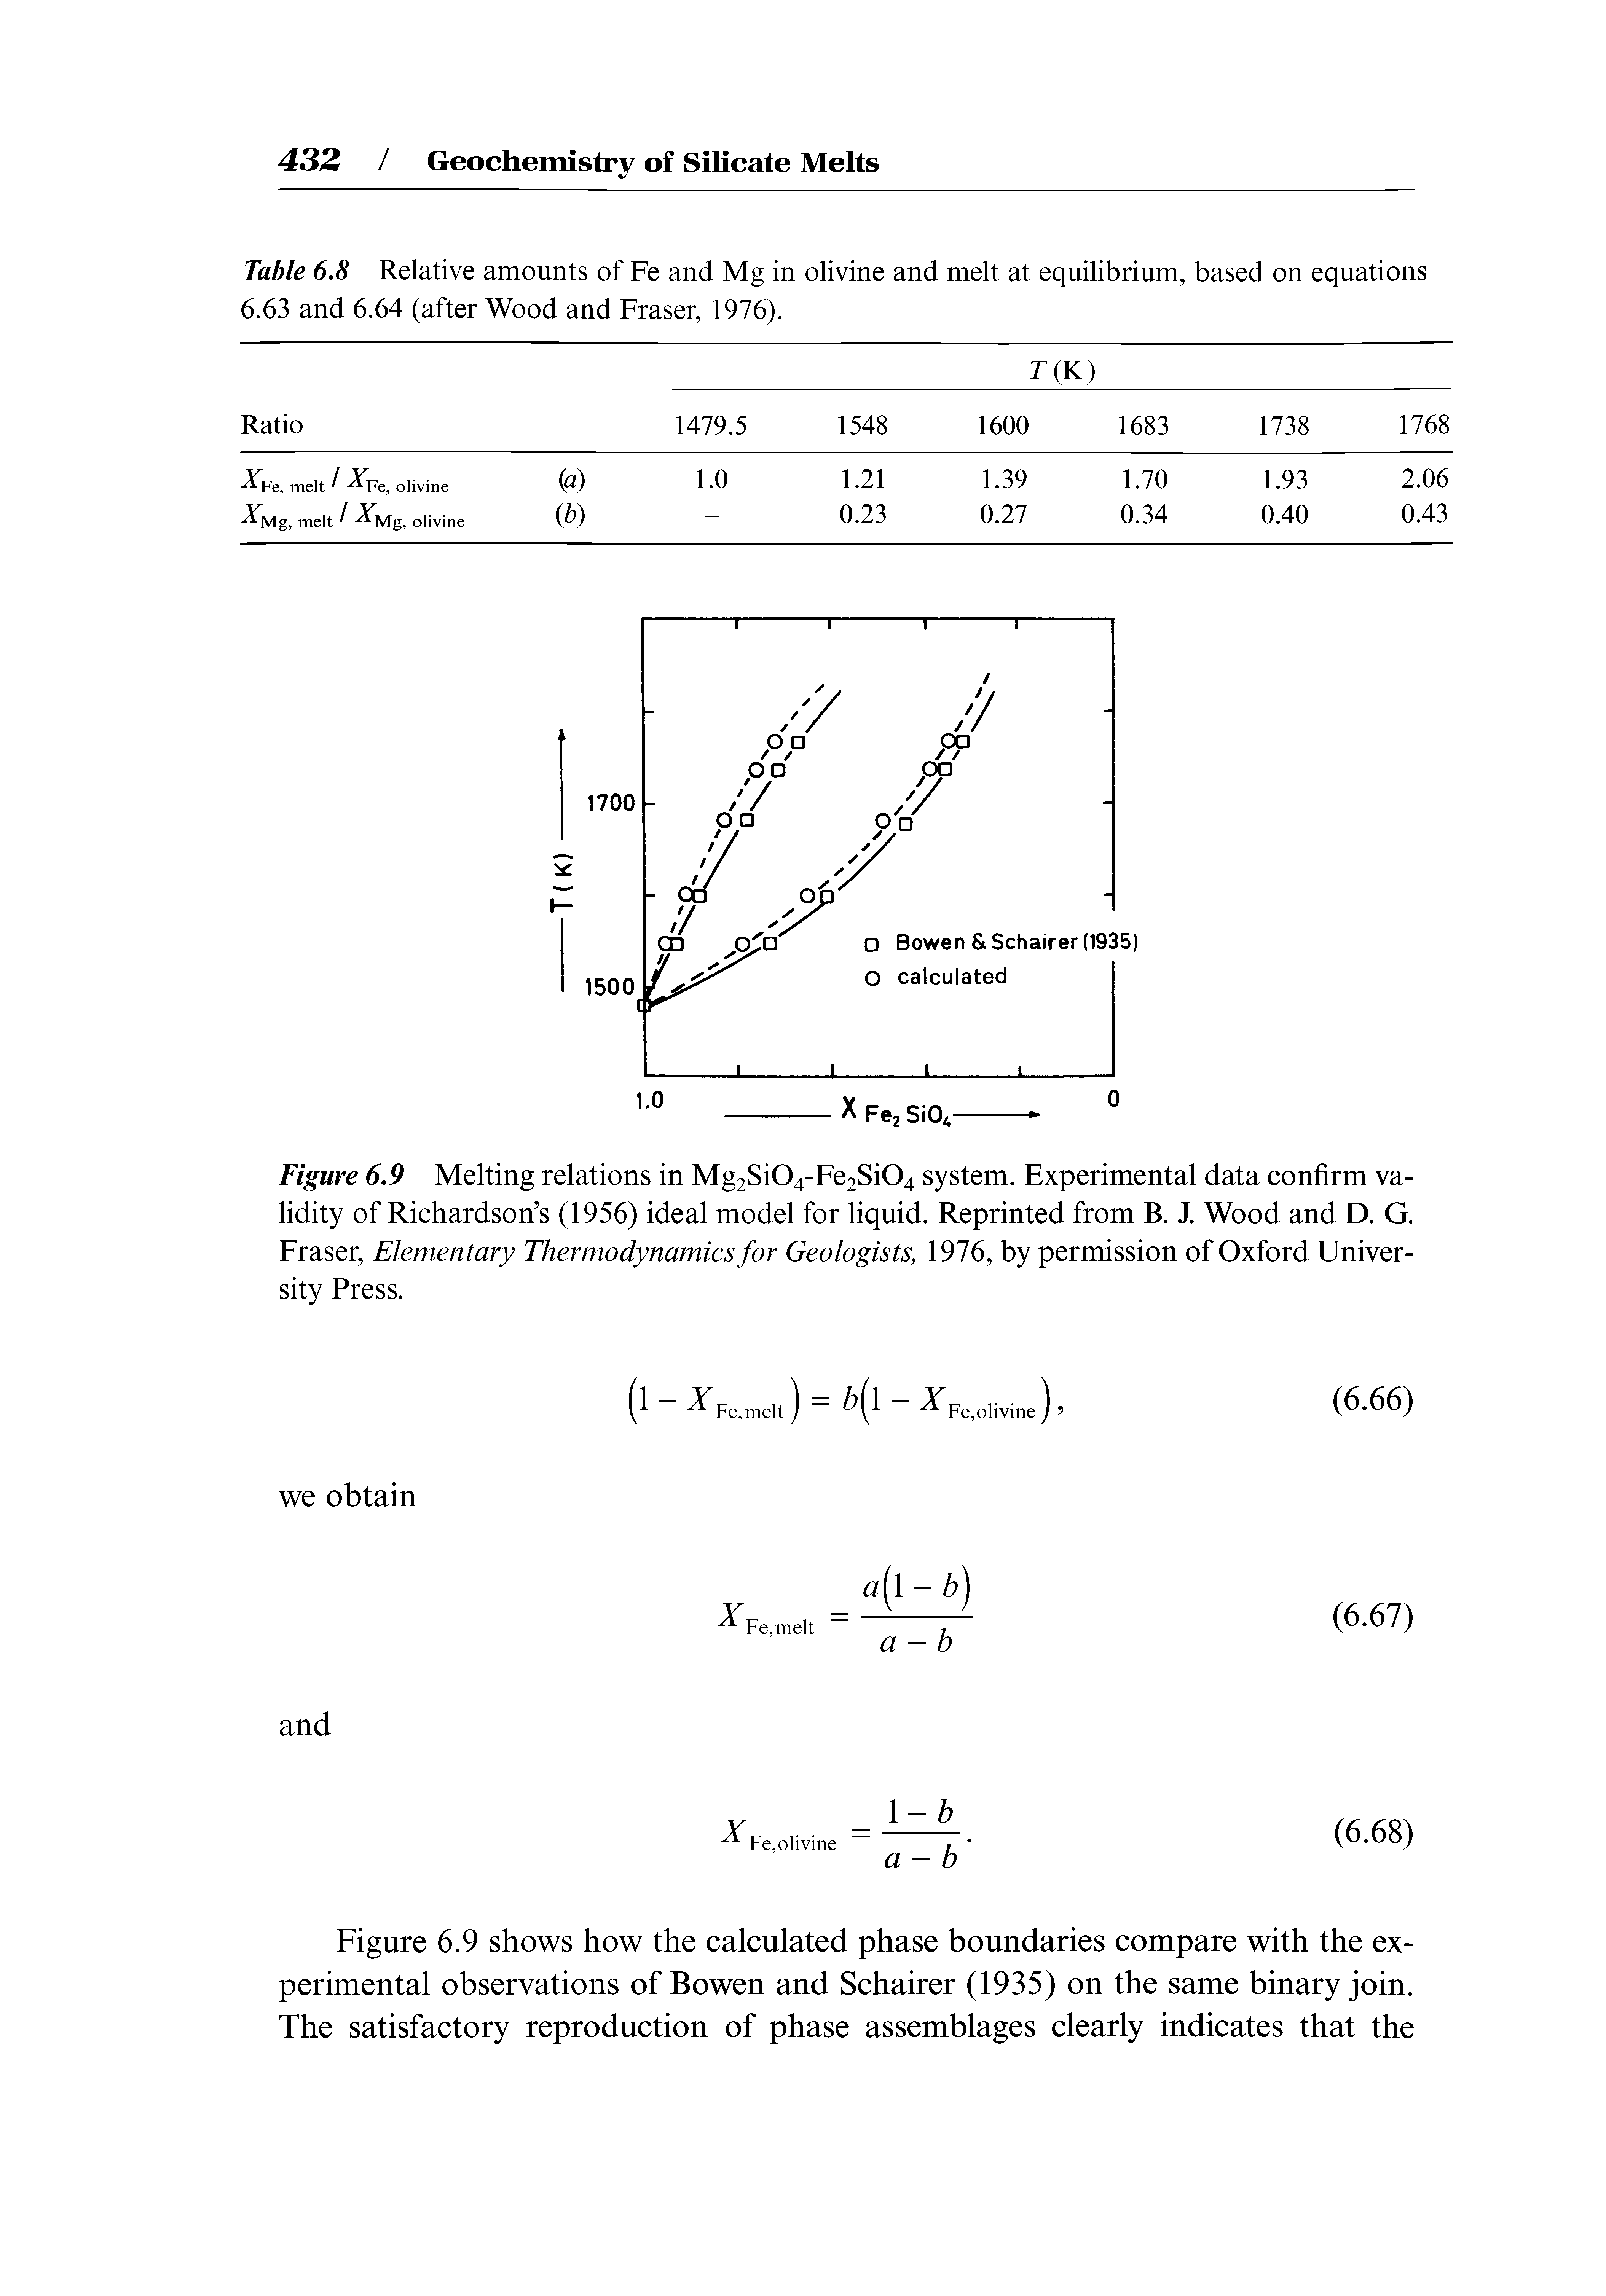 Figure 6,9 Melting relations in Mg2Si04-Fe2Si04 system. Experimental data confirm validity of Richardson s (1956) ideal model for liquid. Reprinted from B. J. Wood and D. G. Fraser, Elementary Thermodynamics for Geologists, 1976, by permission of Oxford University Press.